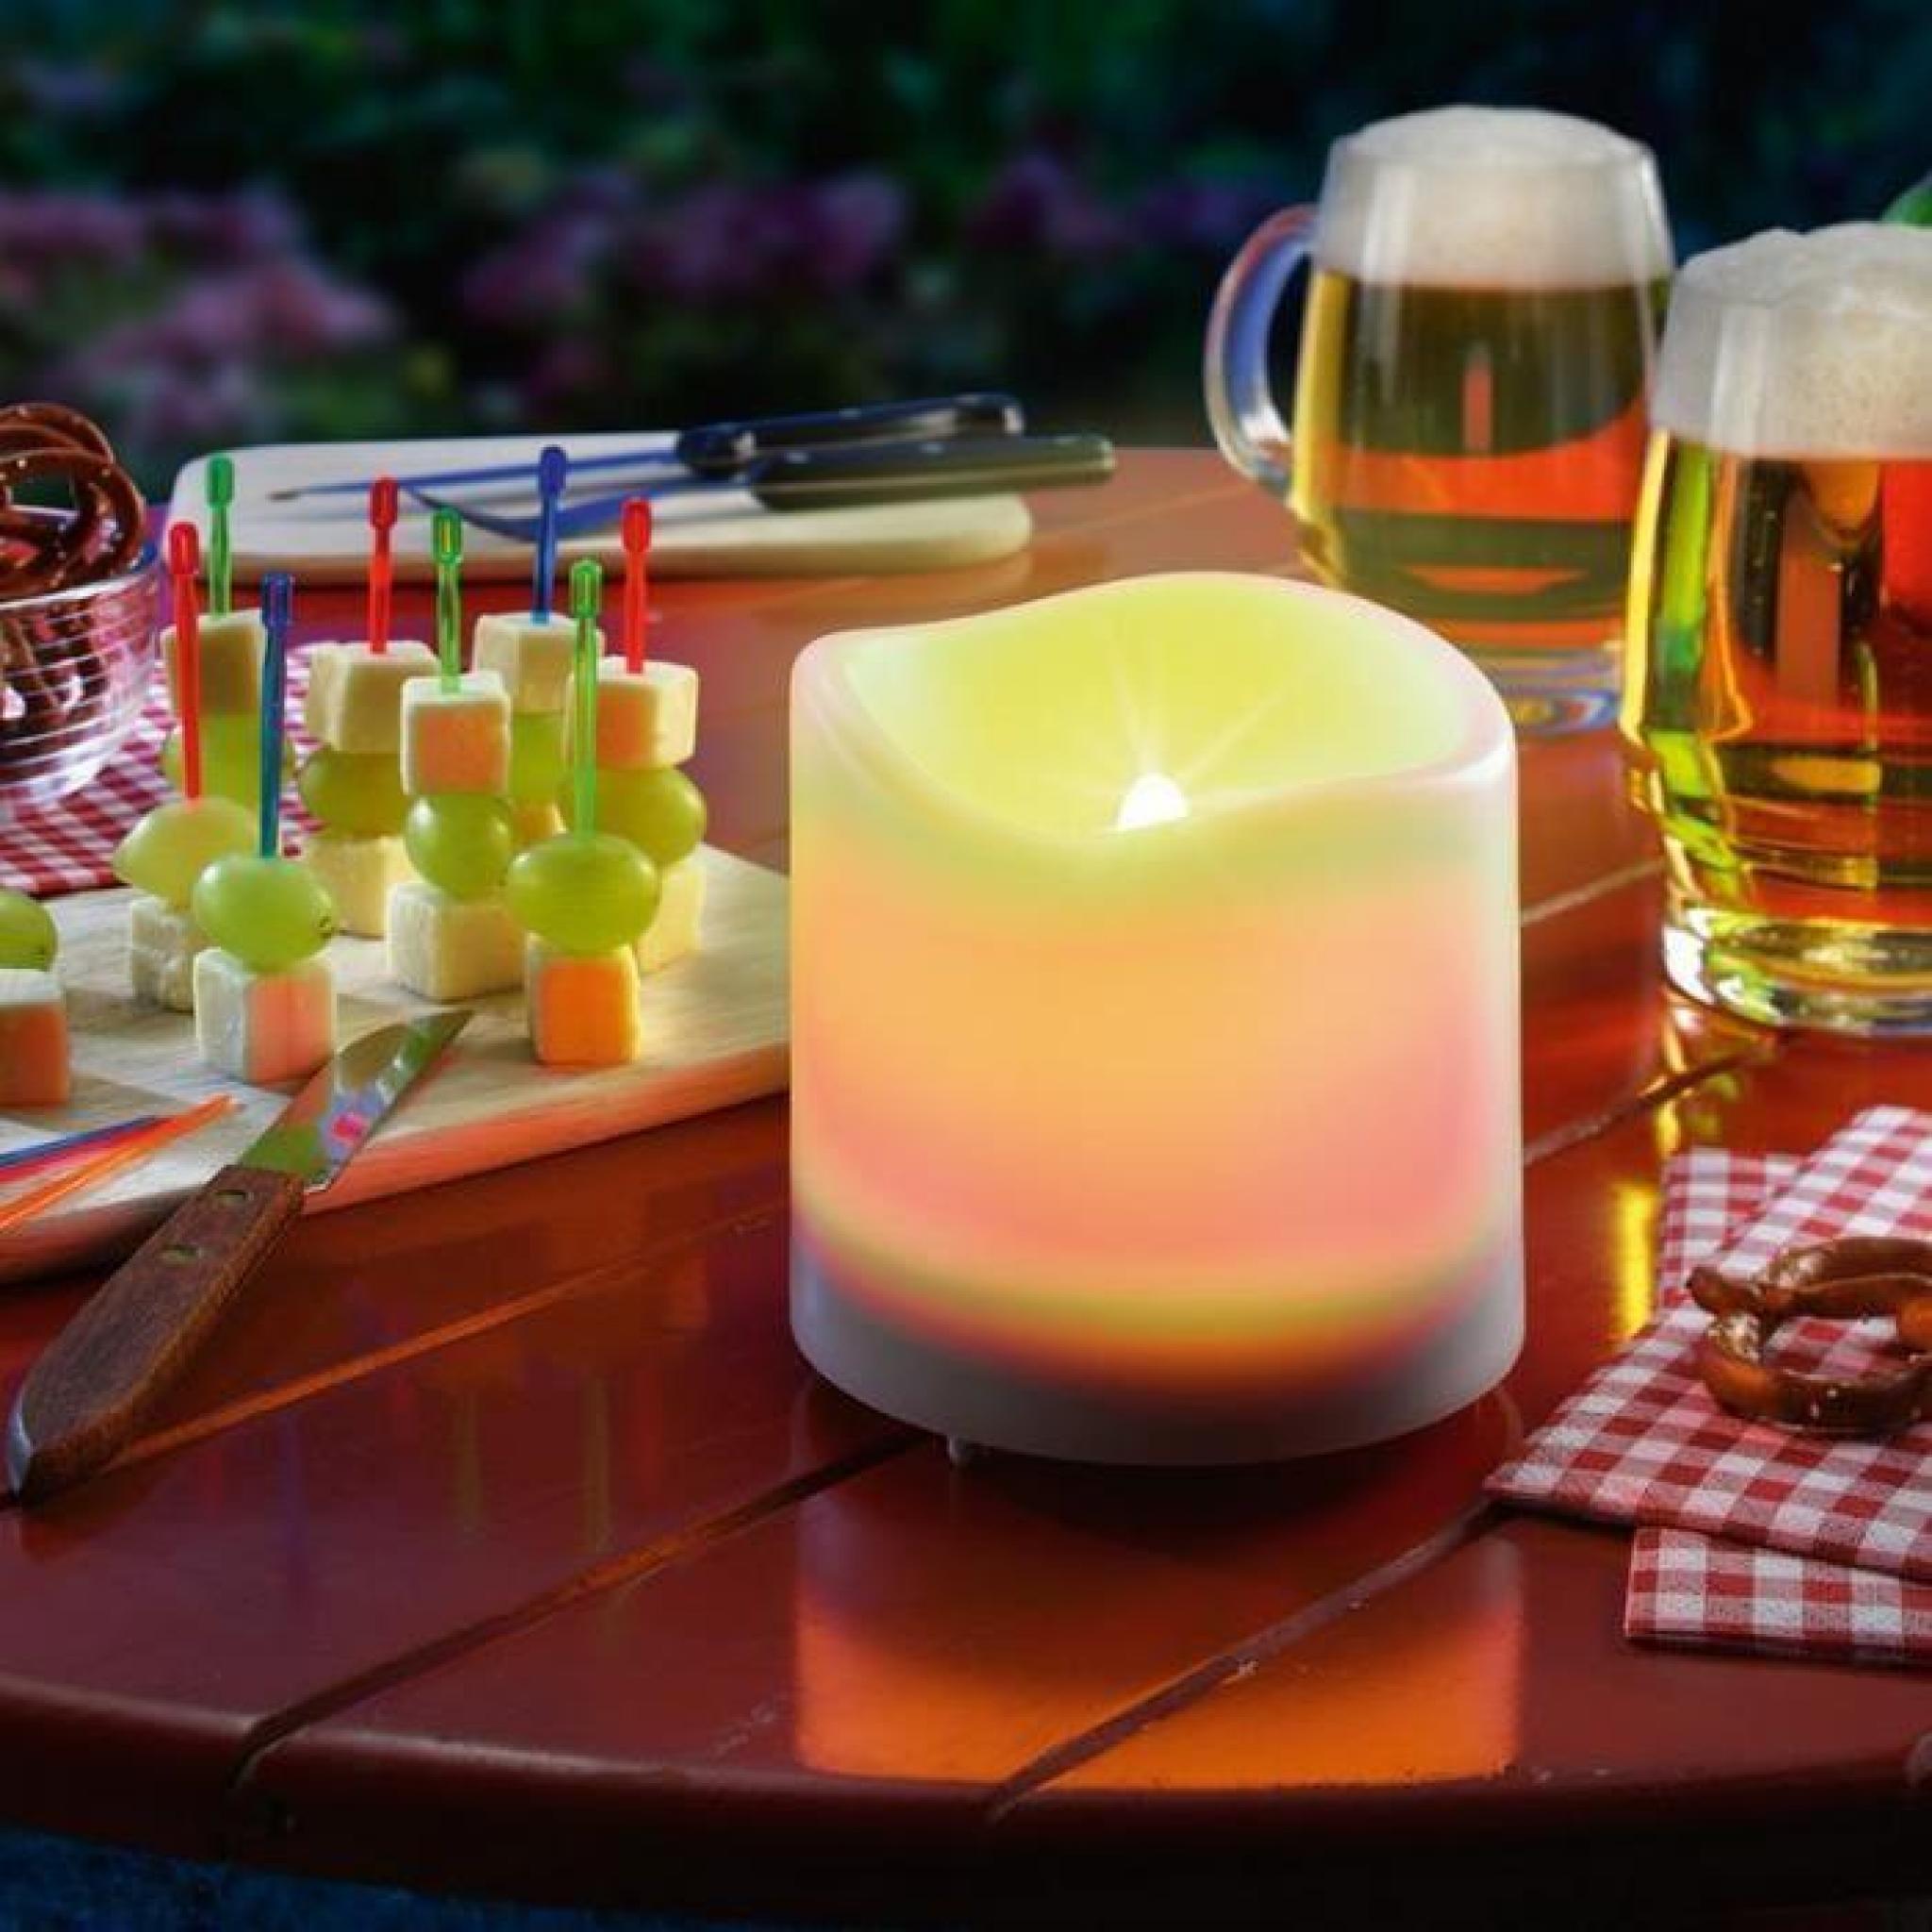 Lampe solaire bougie Candle Light pas cher